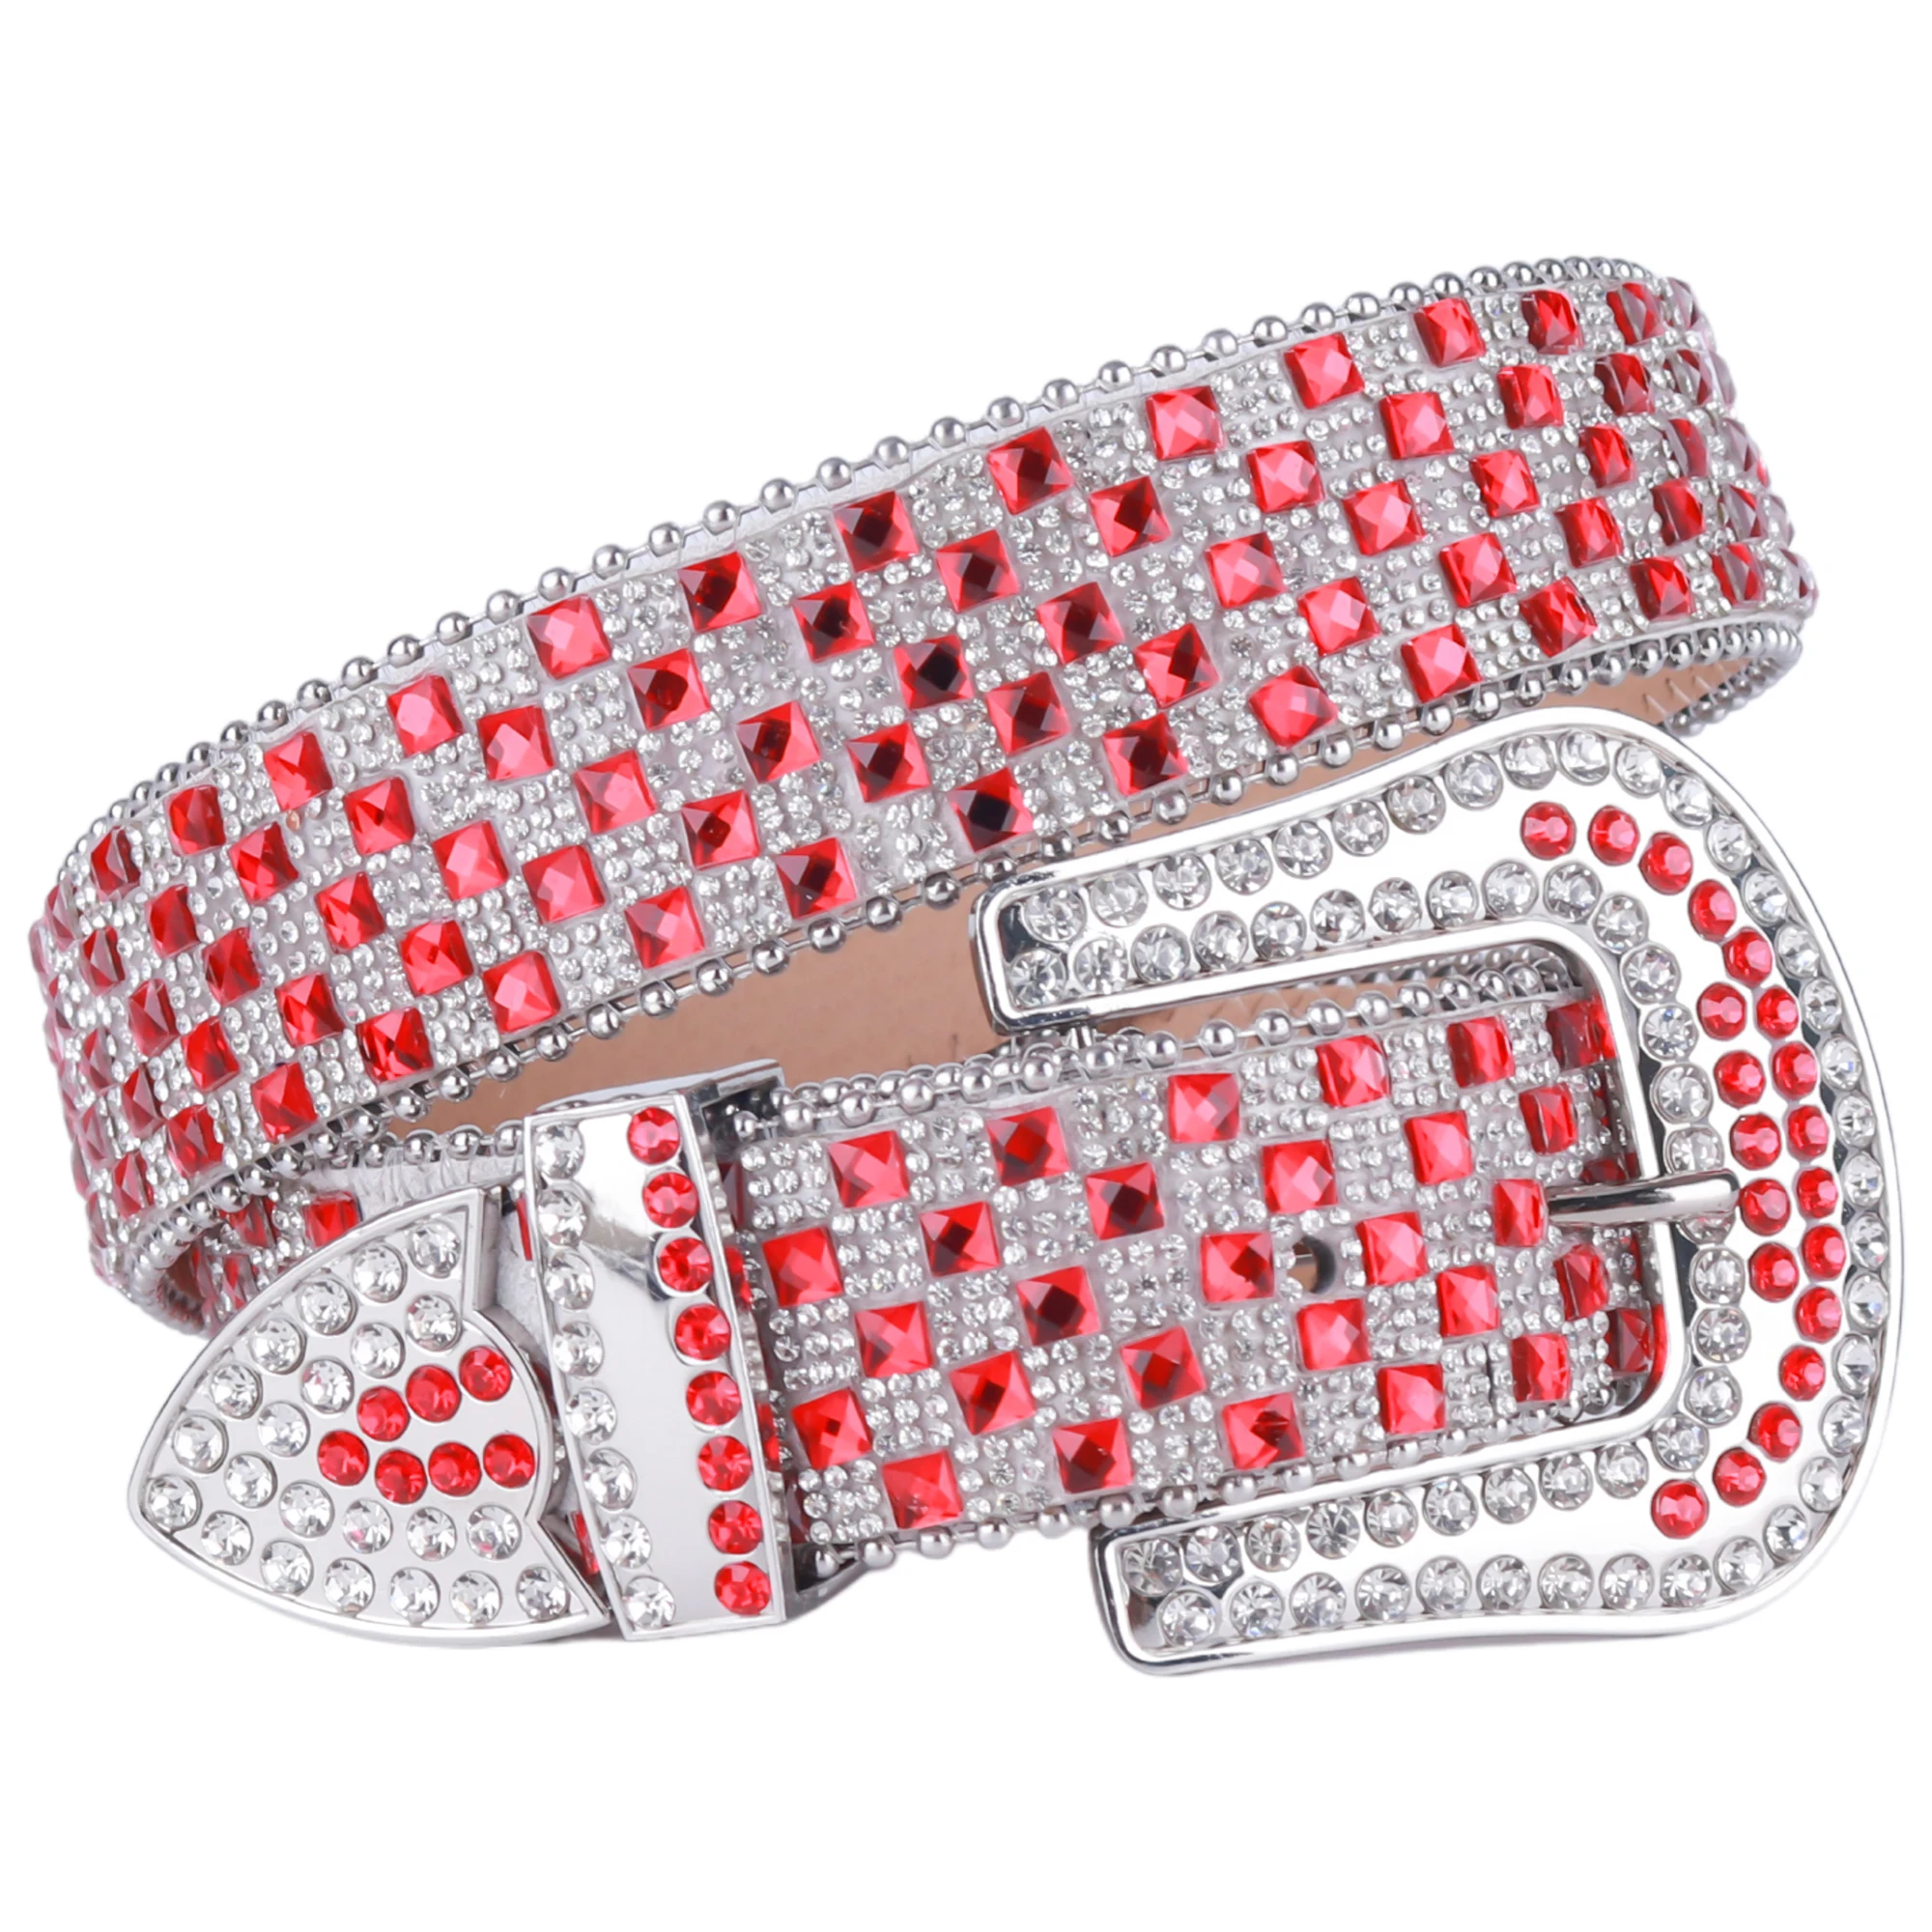 Western Rhinestones Punk Belts For Women Man High Quality Bling Bling Diamond Crystal Studded Belt For Jeans Cowboy Cowgirl